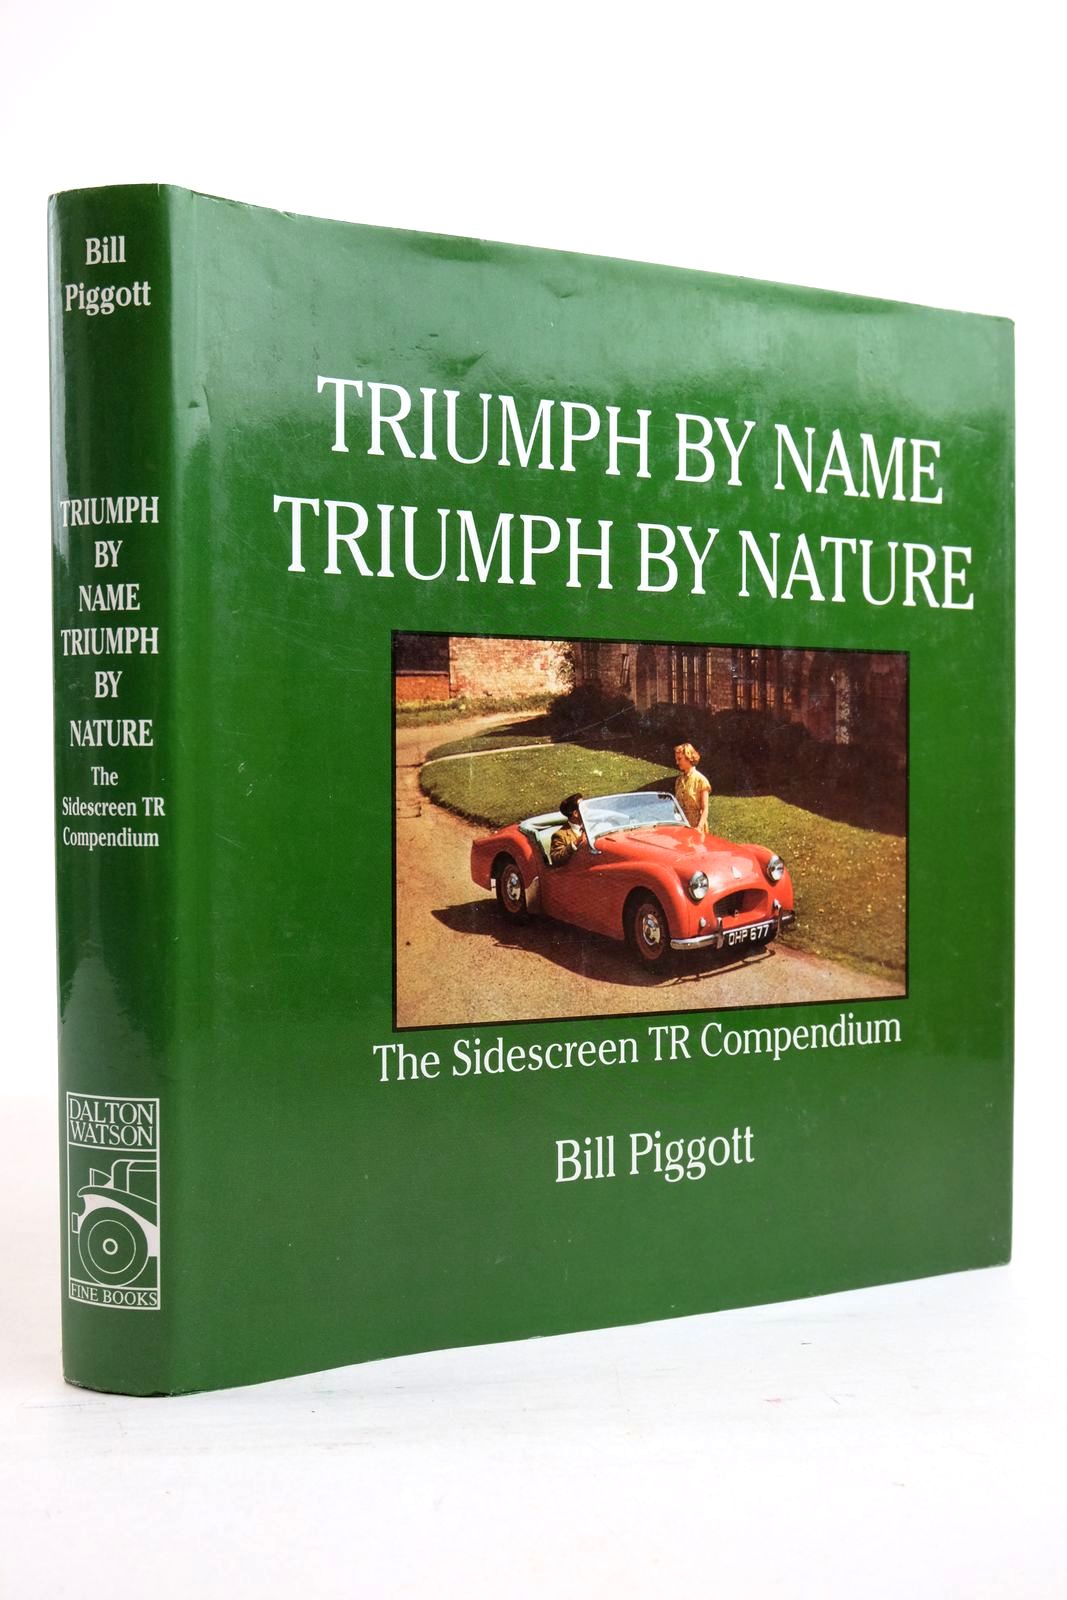 Photo of TRIUMPH BY NAME - TRIUMPH BY NATURE written by Piggott, Bill published by Dalton Watson Fine Books (STOCK CODE: 2134887)  for sale by Stella & Rose's Books